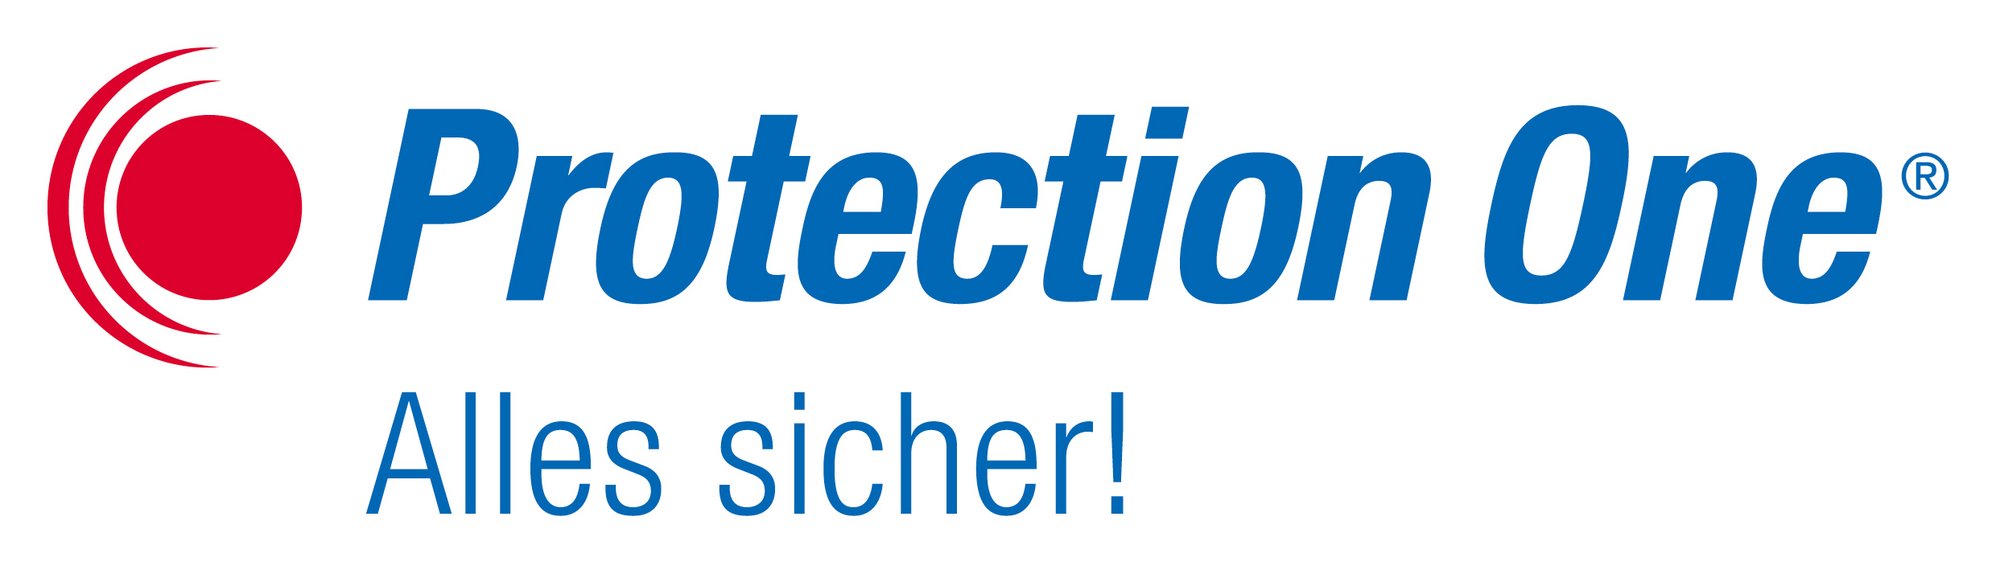 Protection One Logo 